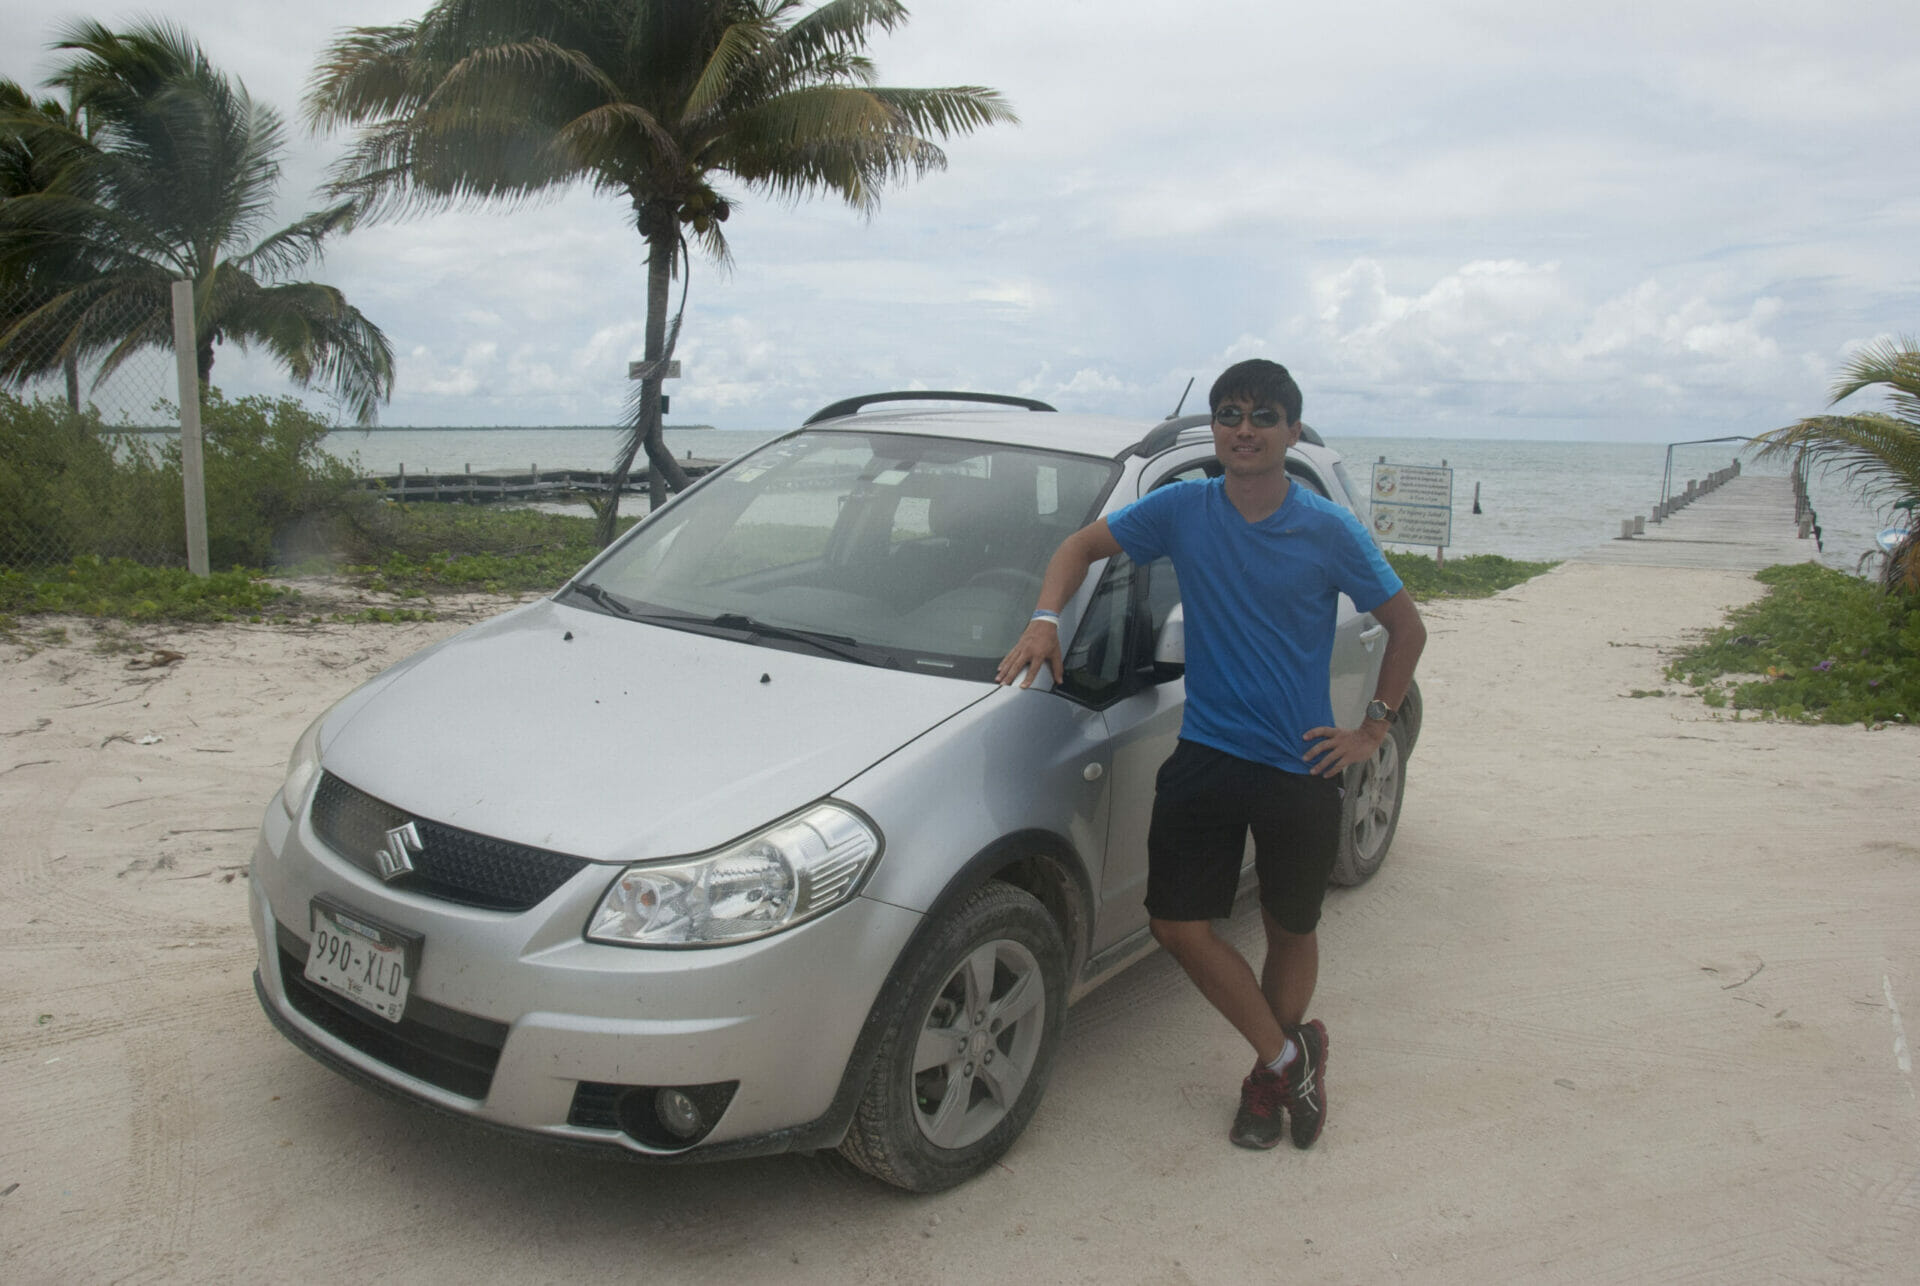 Mexican tourist guide Isao Iwasaki poses next to his car